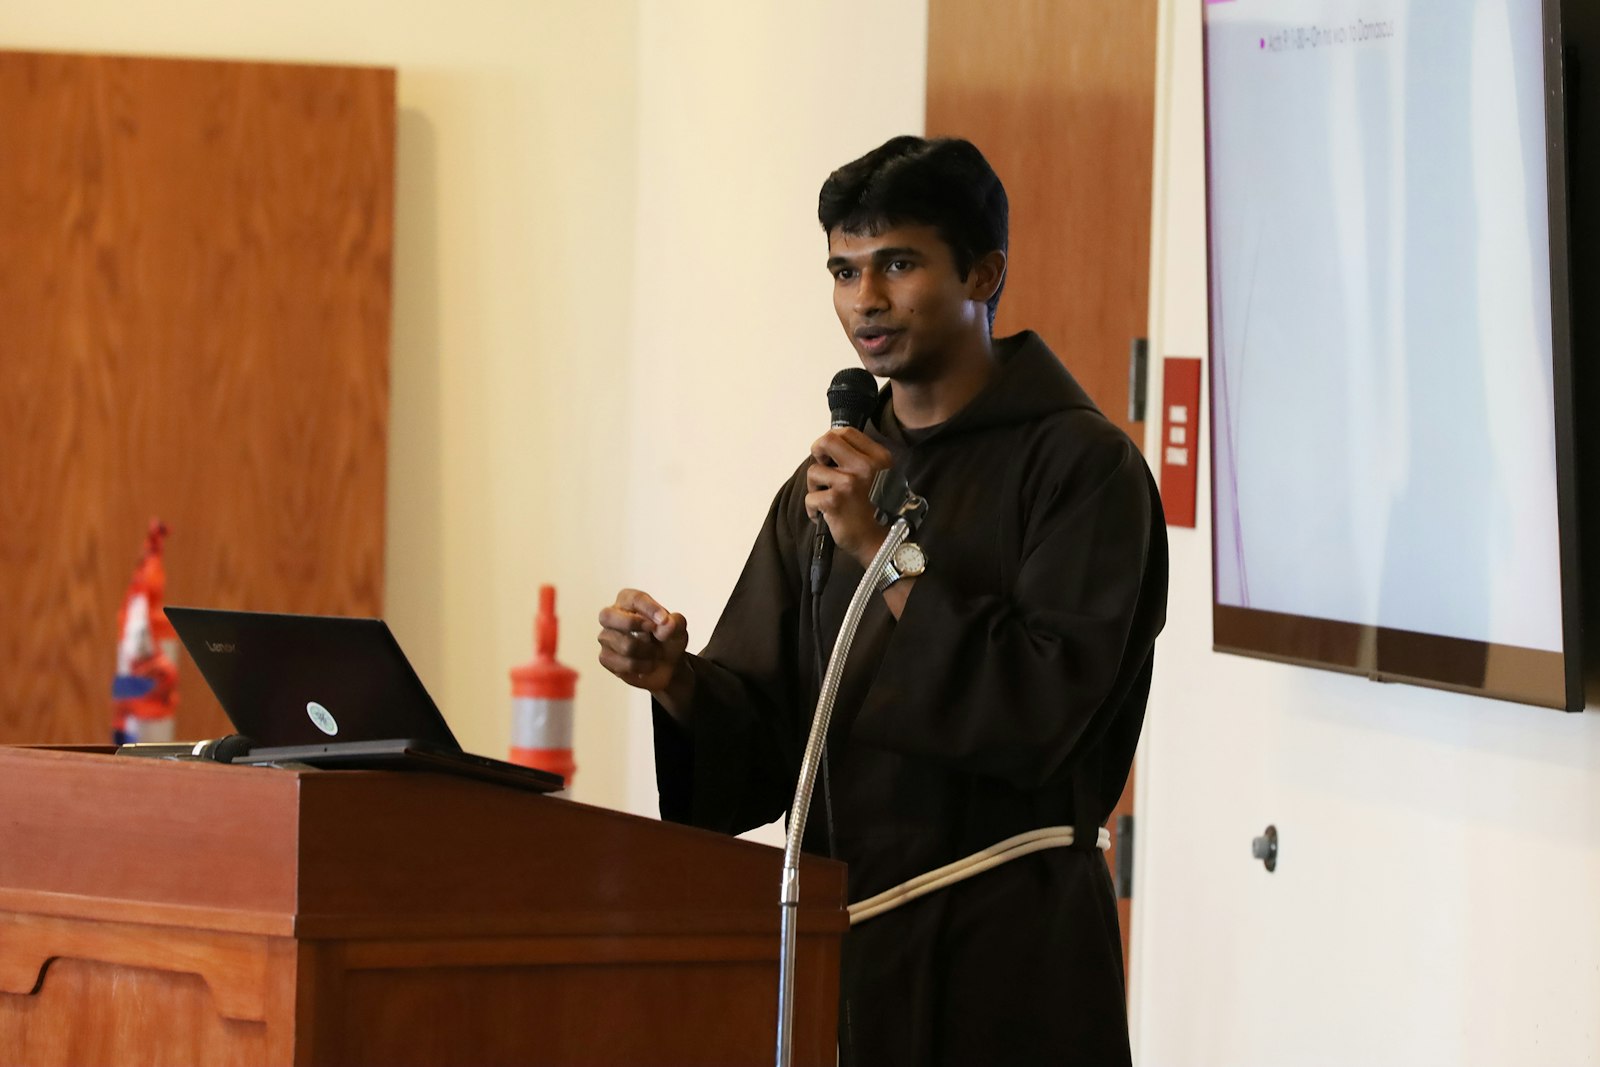 Fr. Antony Julius Milton, OFM Cap., who was ordained earlier this spring in India, will serve at the Capuchin Retreat Center in Washington Township.